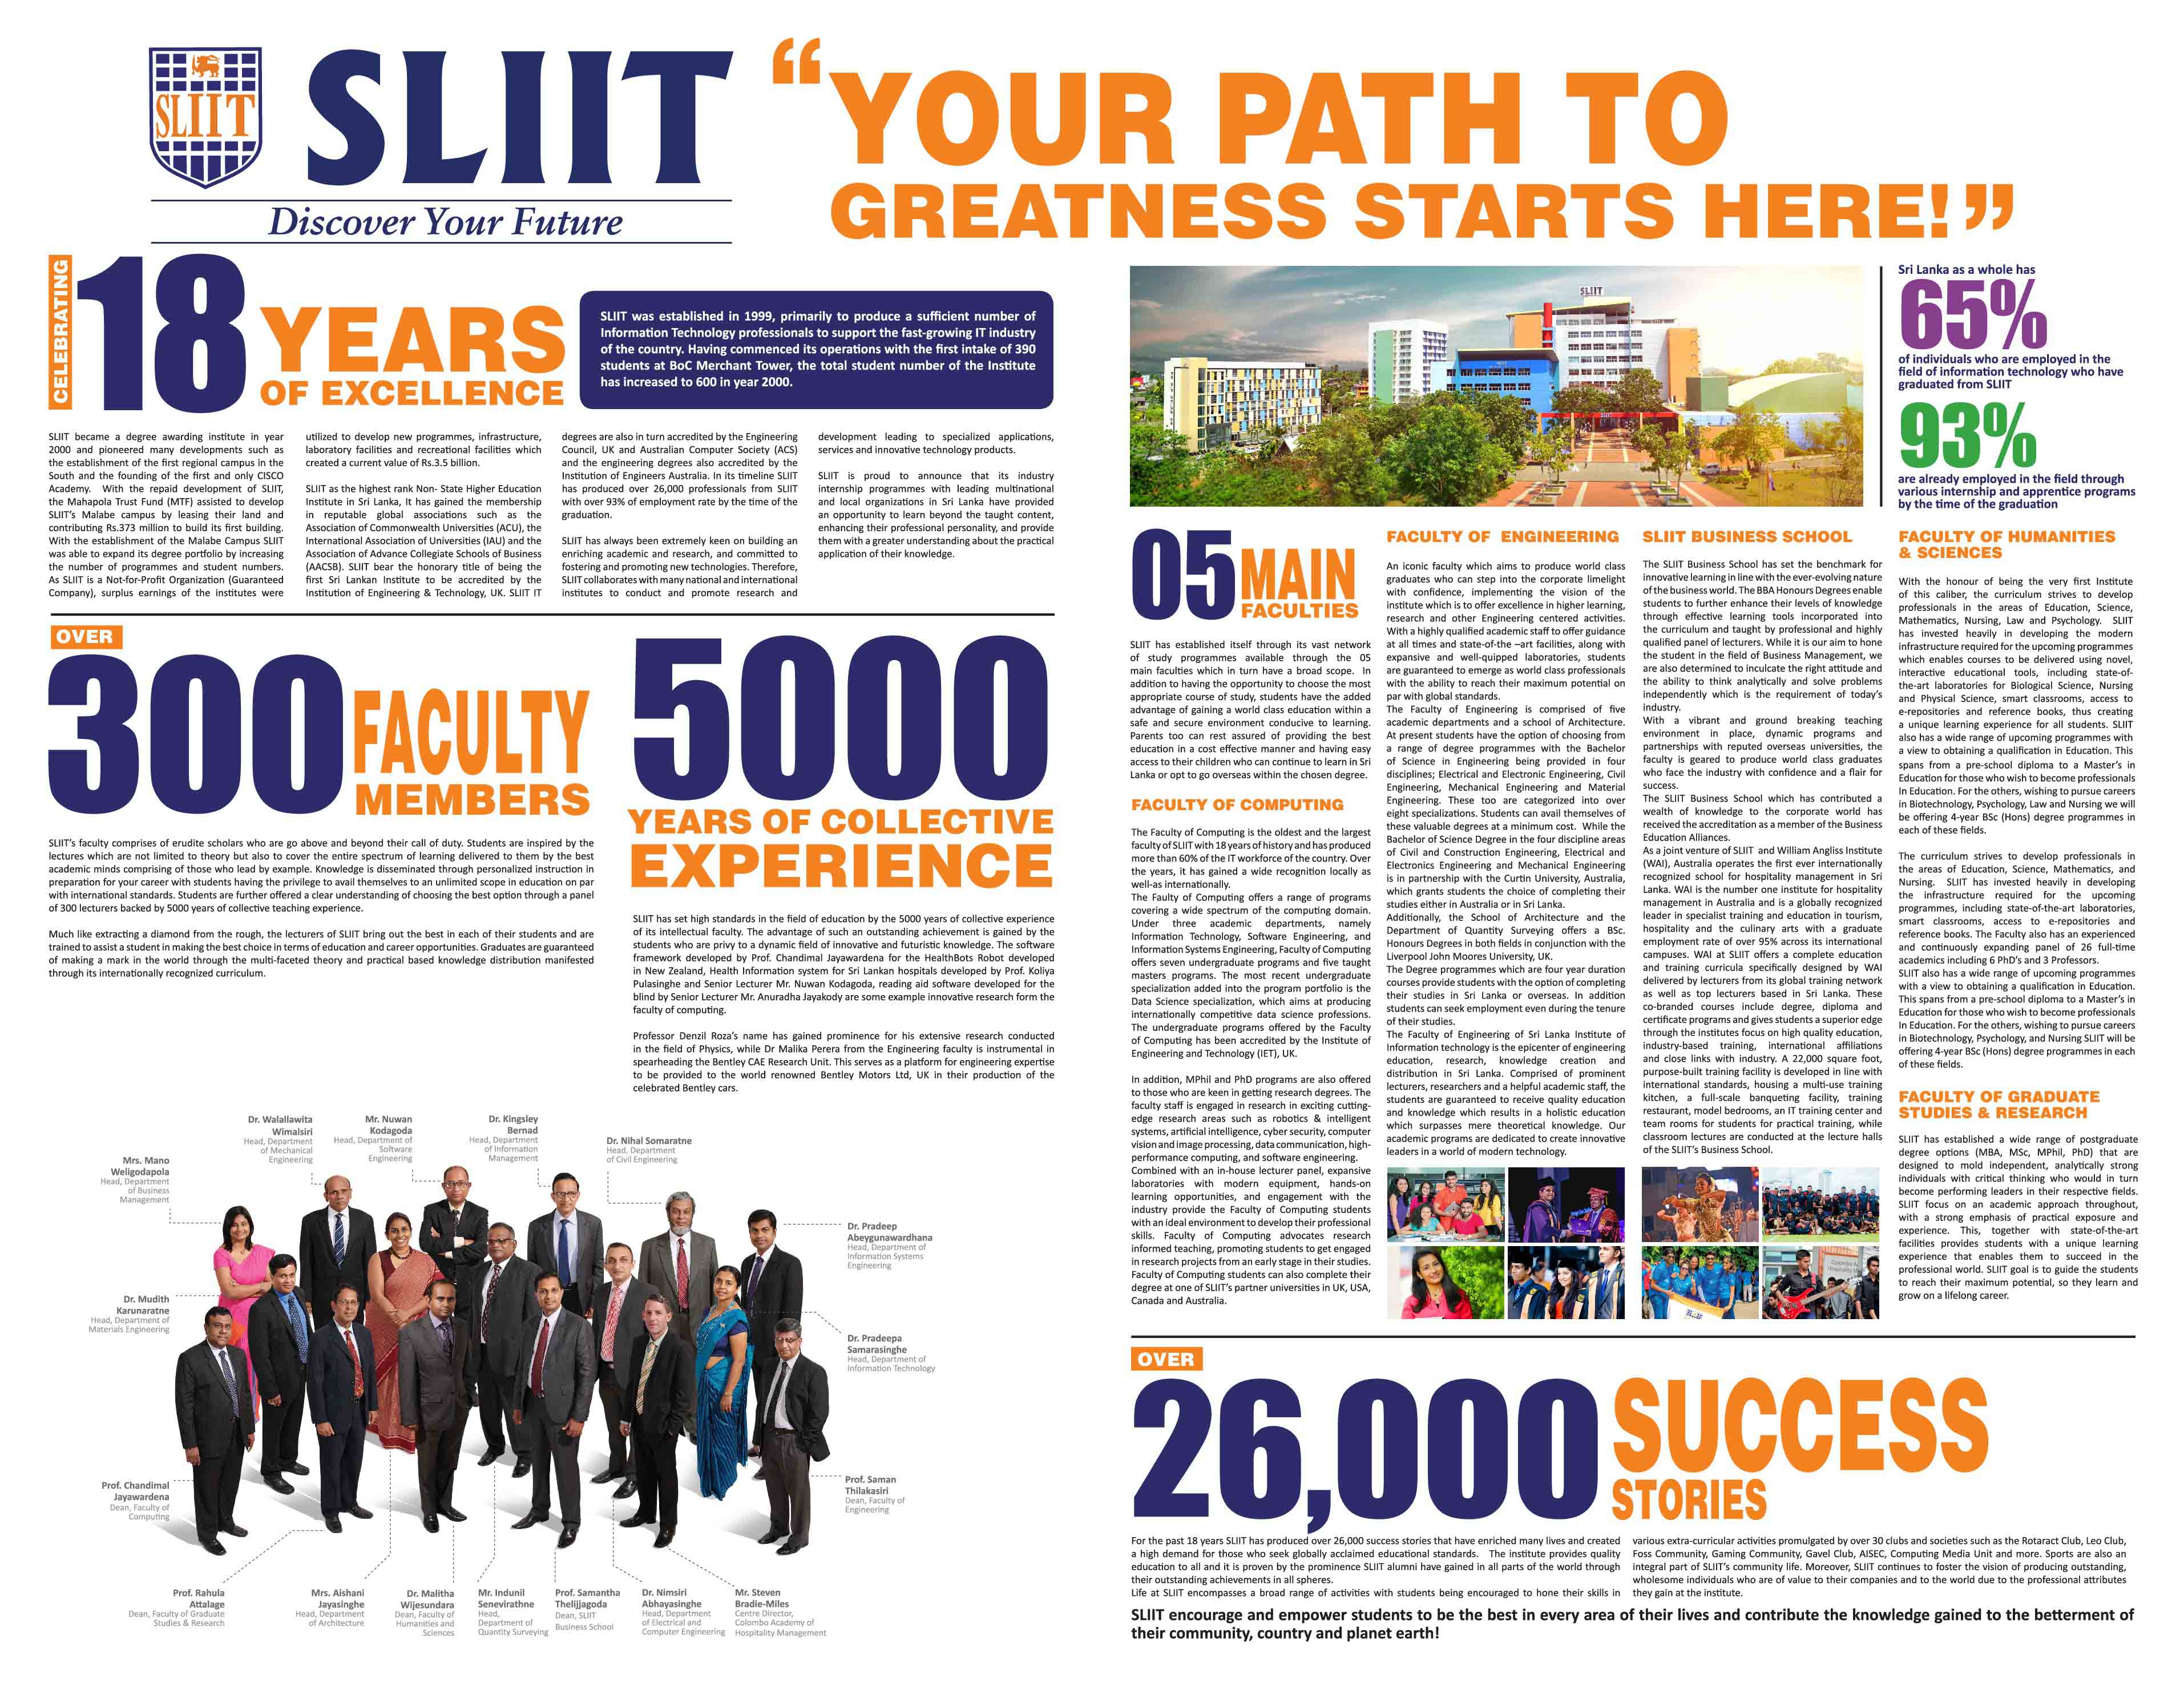 SLIIT-Your-Path-to-Greatness-Starts-Here-Sunday-Times-7.10.2018